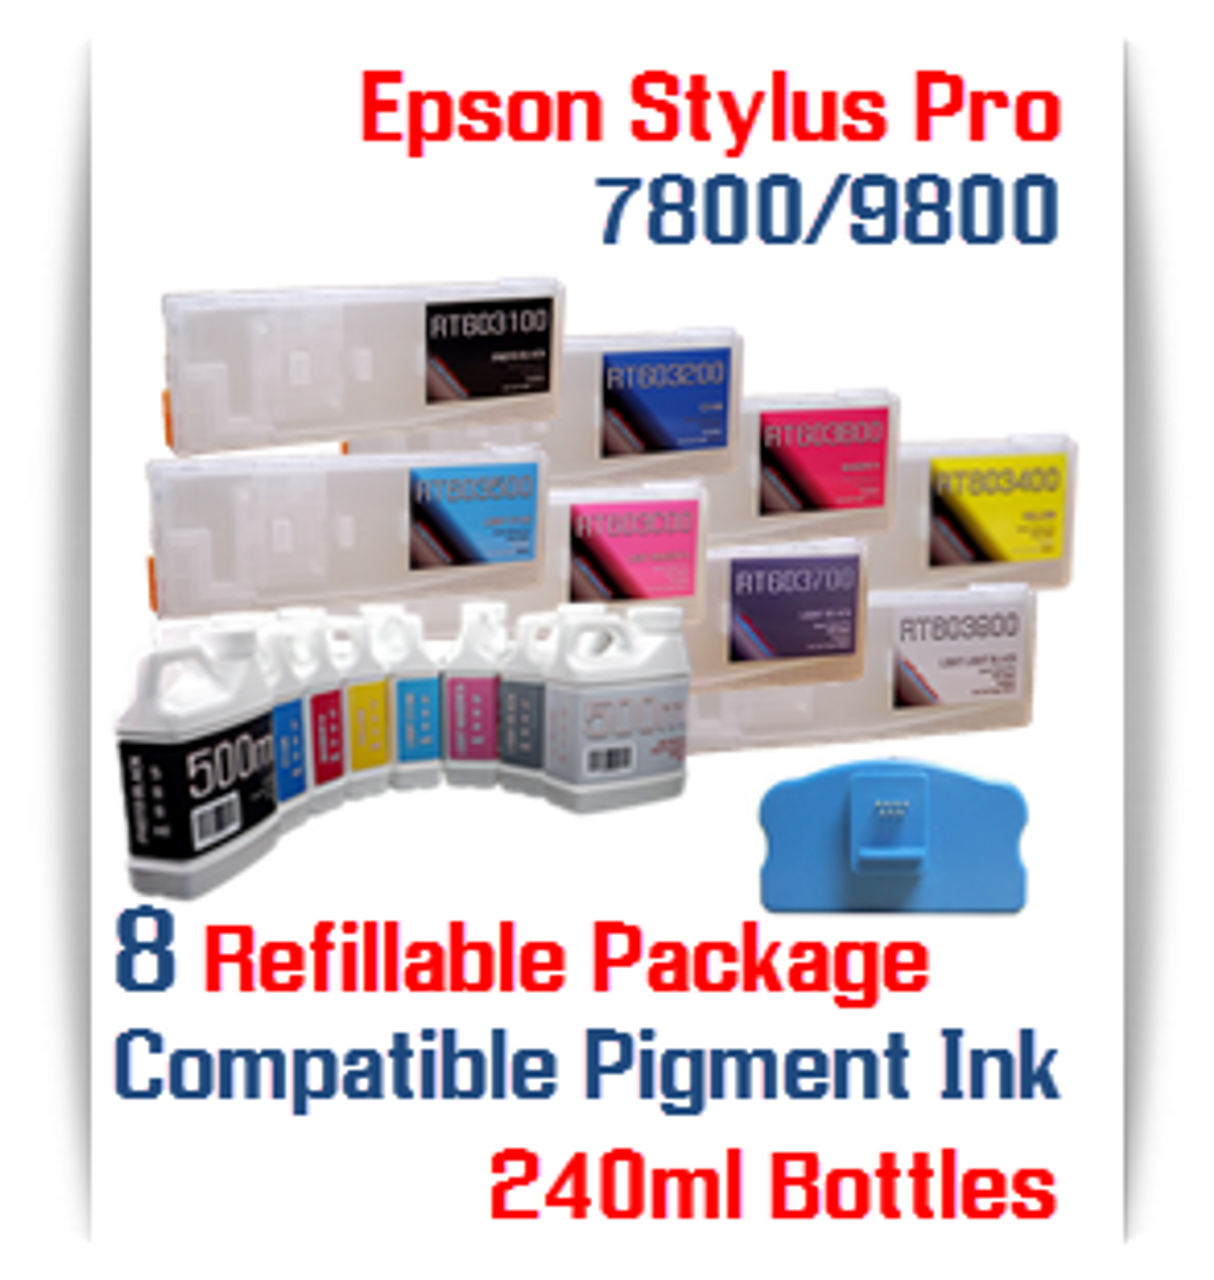 8 Refillable Cartridge Package with 8 Bottles Pigment Ink Epson Stylus Pro  7800, 9800 Printer Compatible Ink Cartridges 350ml